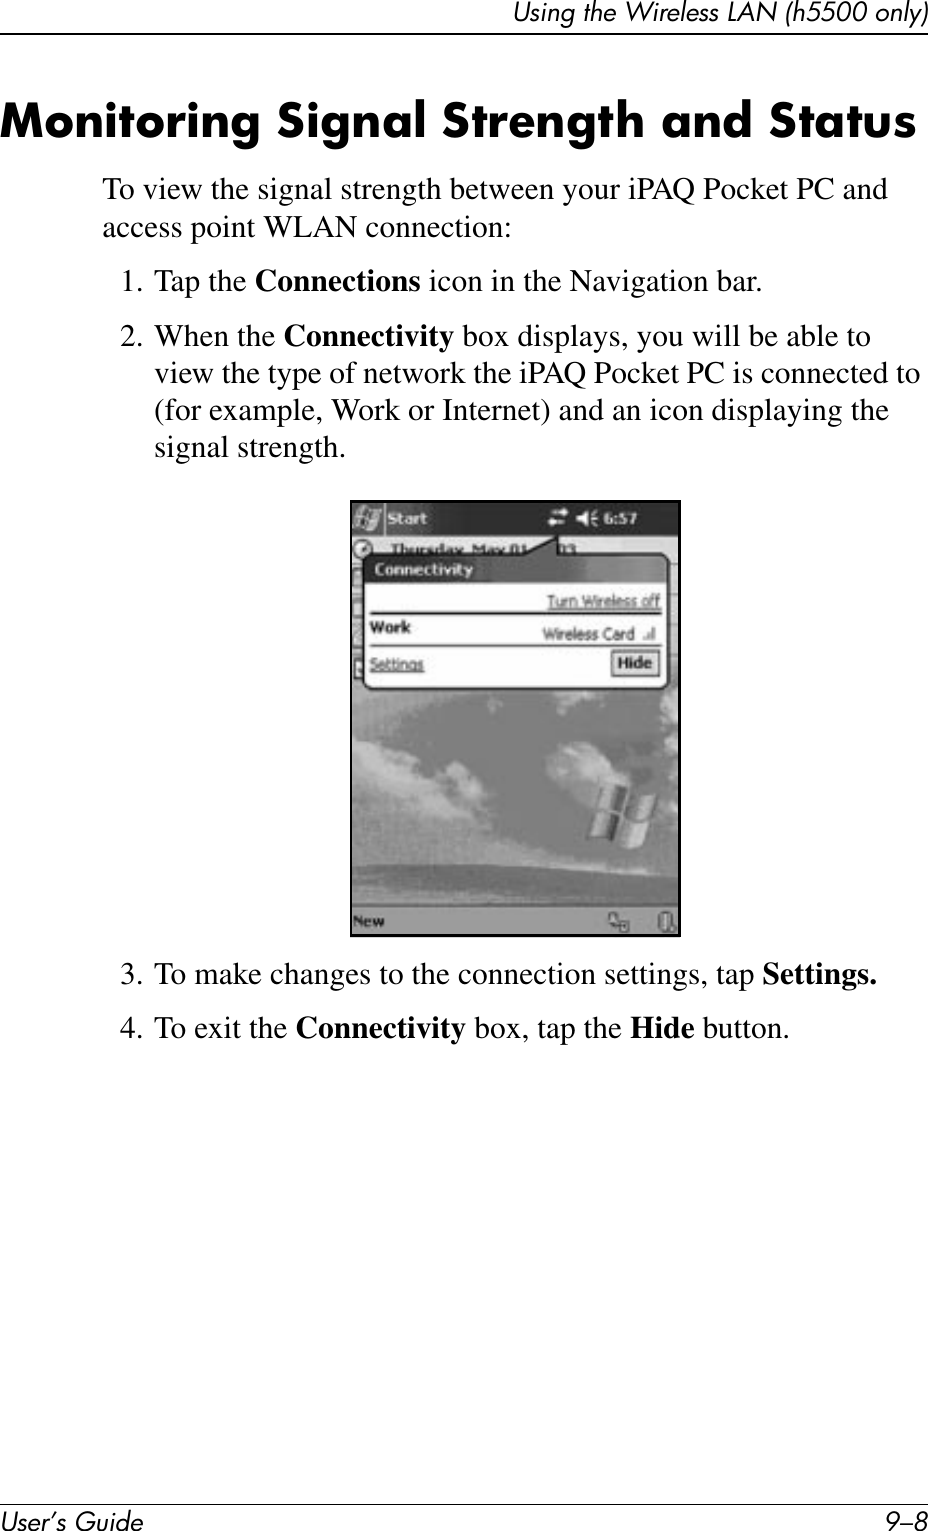 User’s Guide 9–8Using the Wireless LAN (h5500 only)Monitoring Signal Strength and StatusTo view the signal strength between your iPAQ Pocket PC and access point WLAN connection:1. Tap the Connections icon in the Navigation bar.2. When the Connectivity box displays, you will be able to view the type of network the iPAQ Pocket PC is connected to (for example, Work or Internet) and an icon displaying the signal strength.3. To make changes to the connection settings, tap Settings.4. To exit the Connectivity box, tap the Hide button.